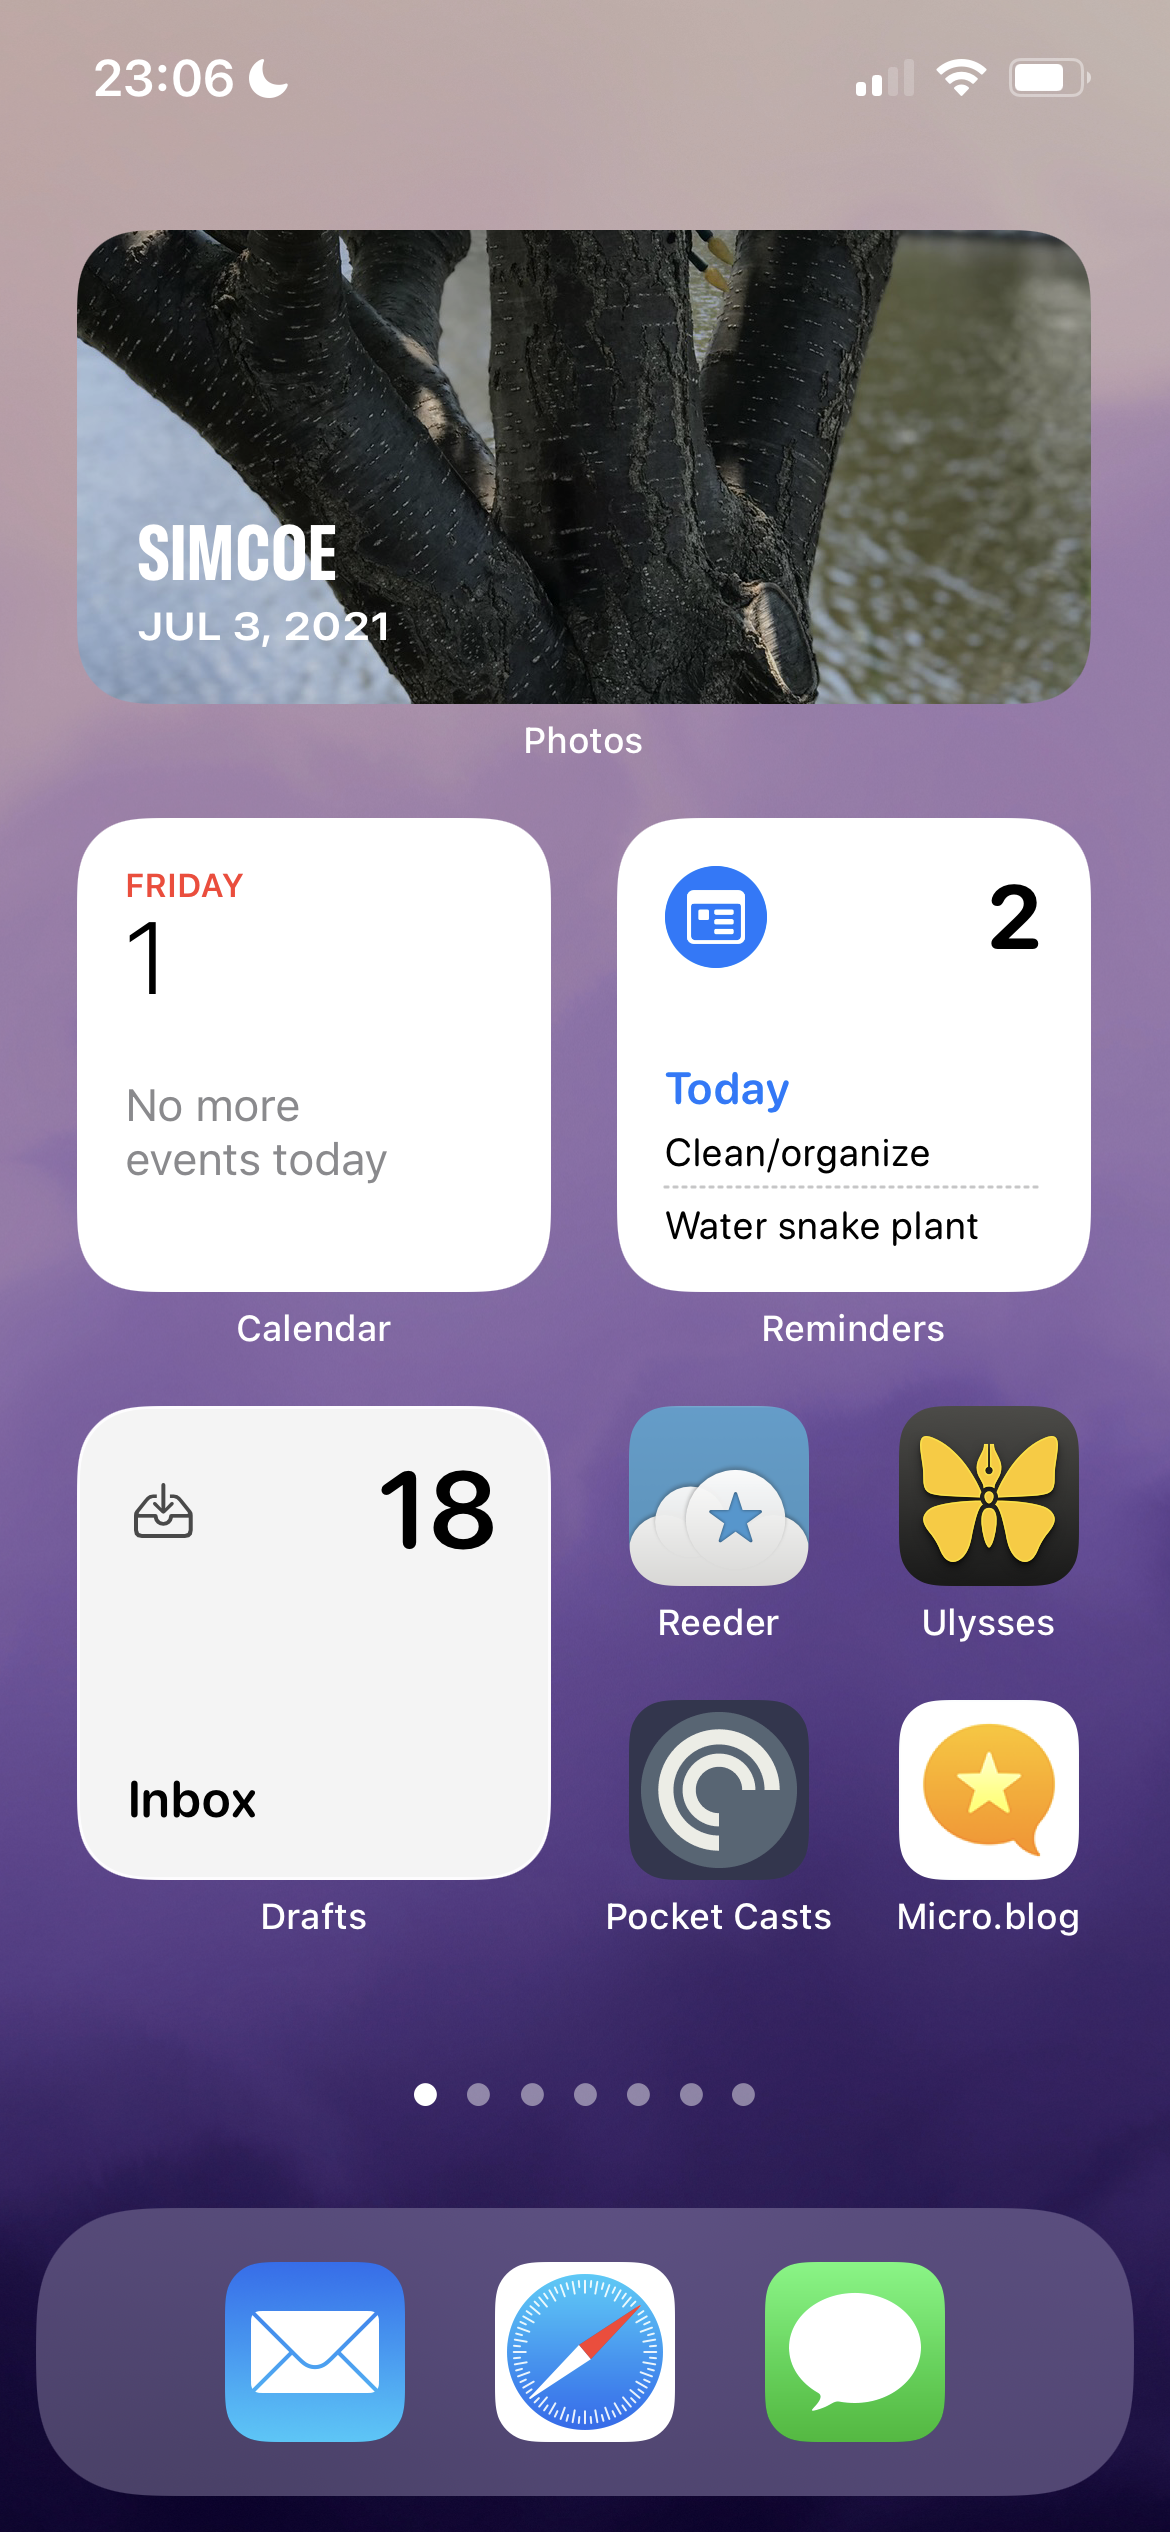 A screenshot of my iphone homescreen. Includes a widget stack, single widgets for calendar, reminders, and drafts, and icons for Reeder, Ulysses, Pocket Casts, and Micro.blog.